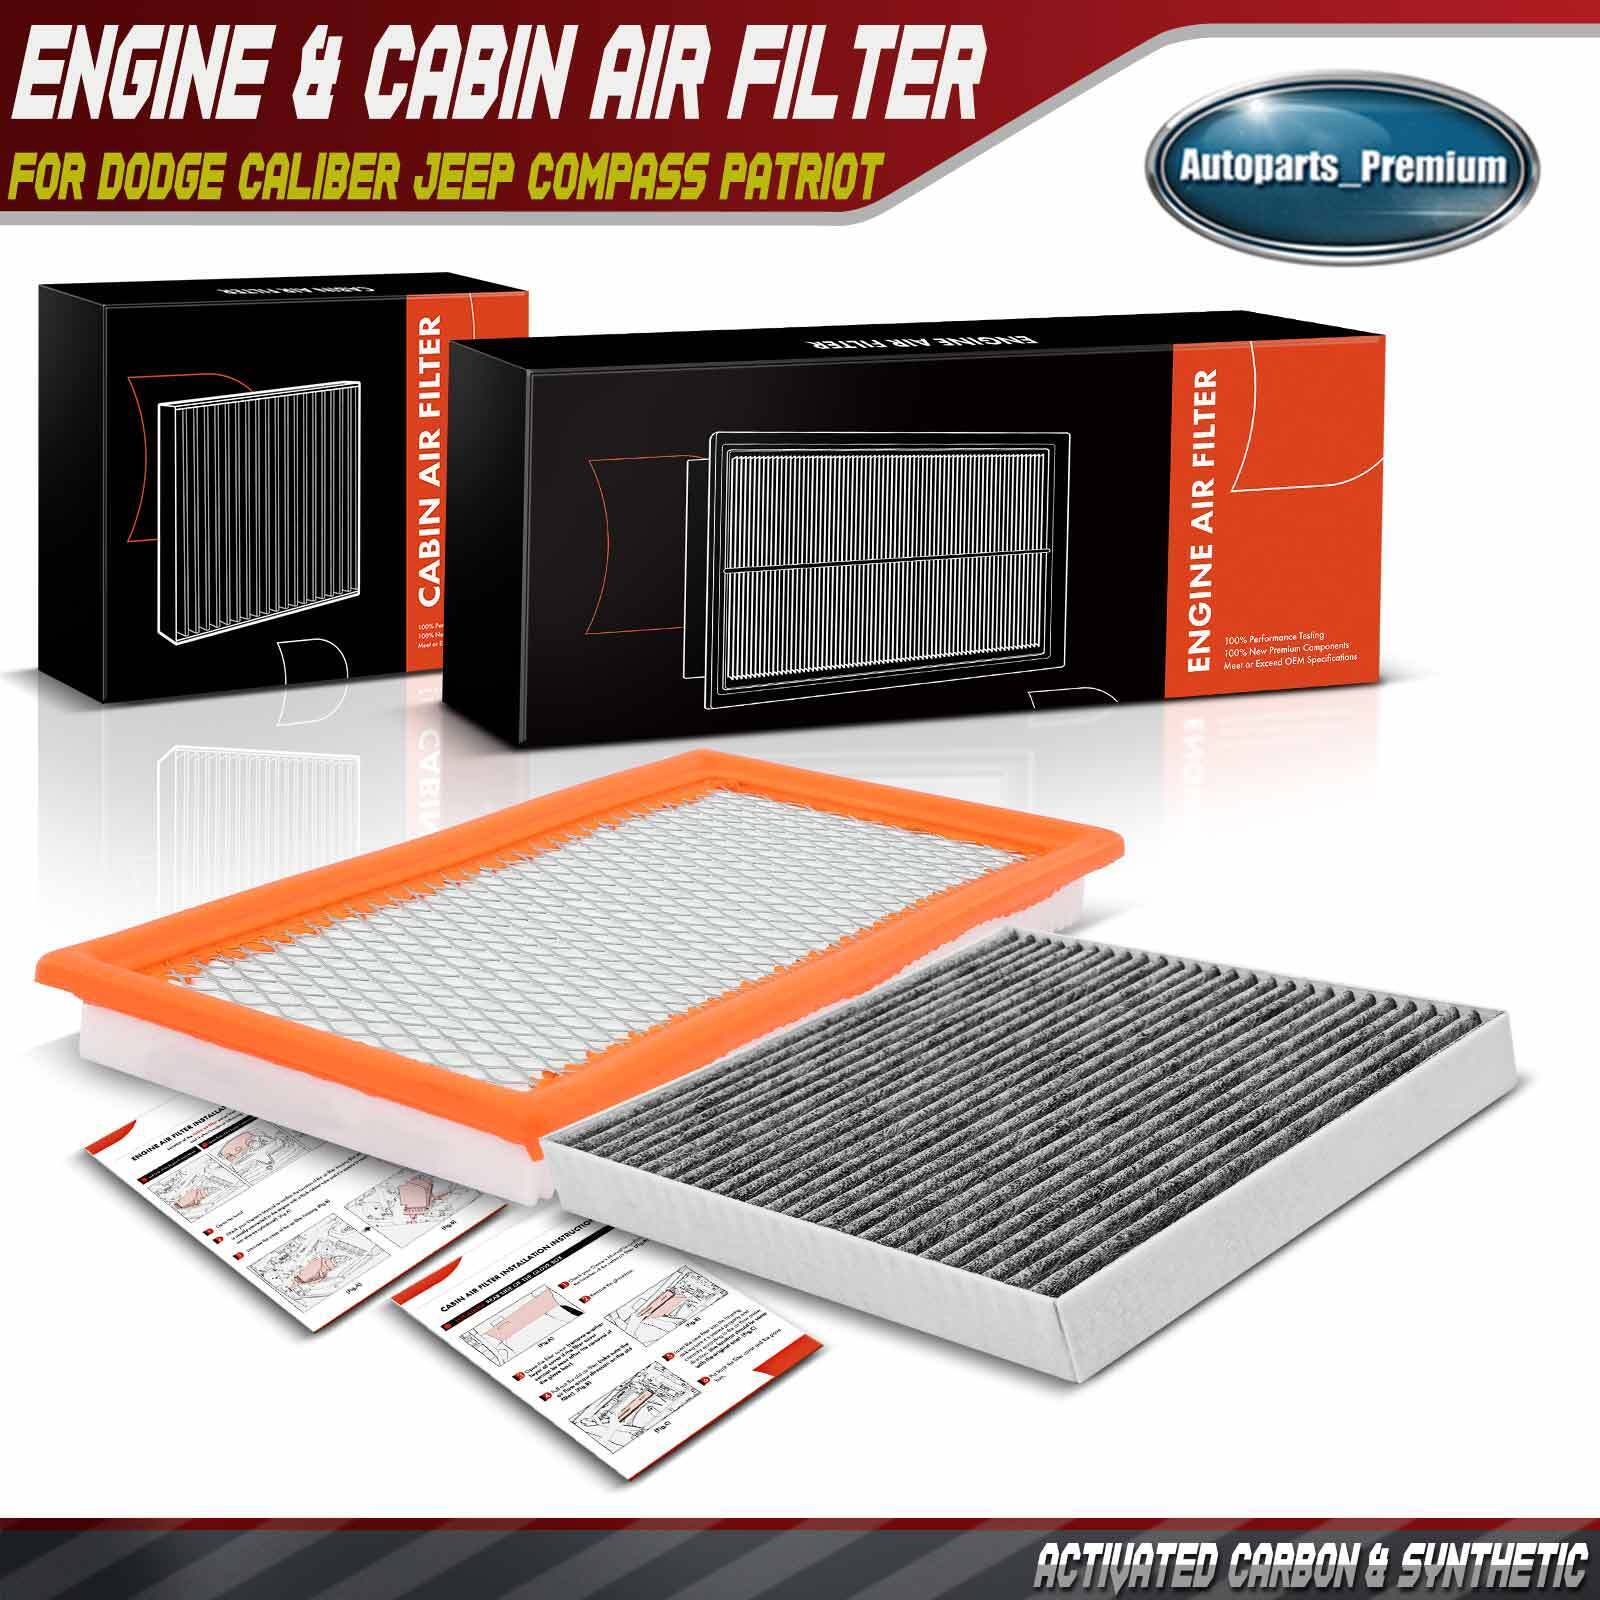 Engine & Cabin Air Filter for Dodge Caliber Jeep Compass Patriot 2007-2010